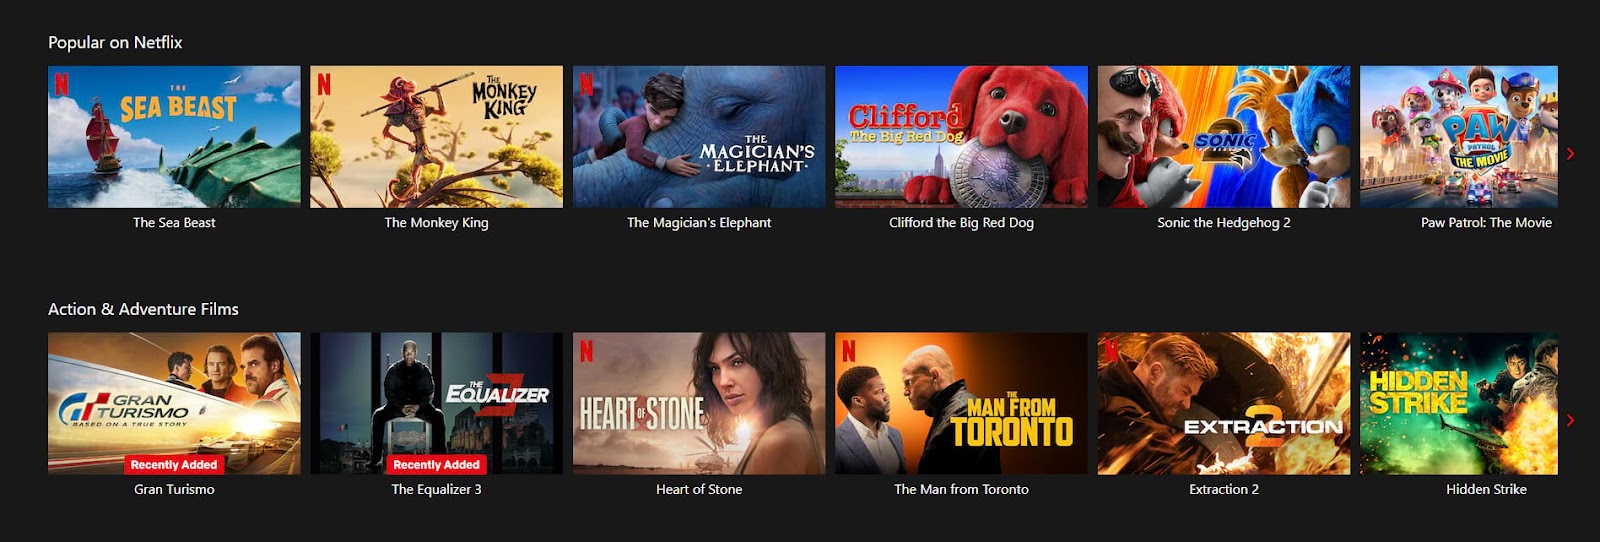 A screen showing movies recommended by Netflix